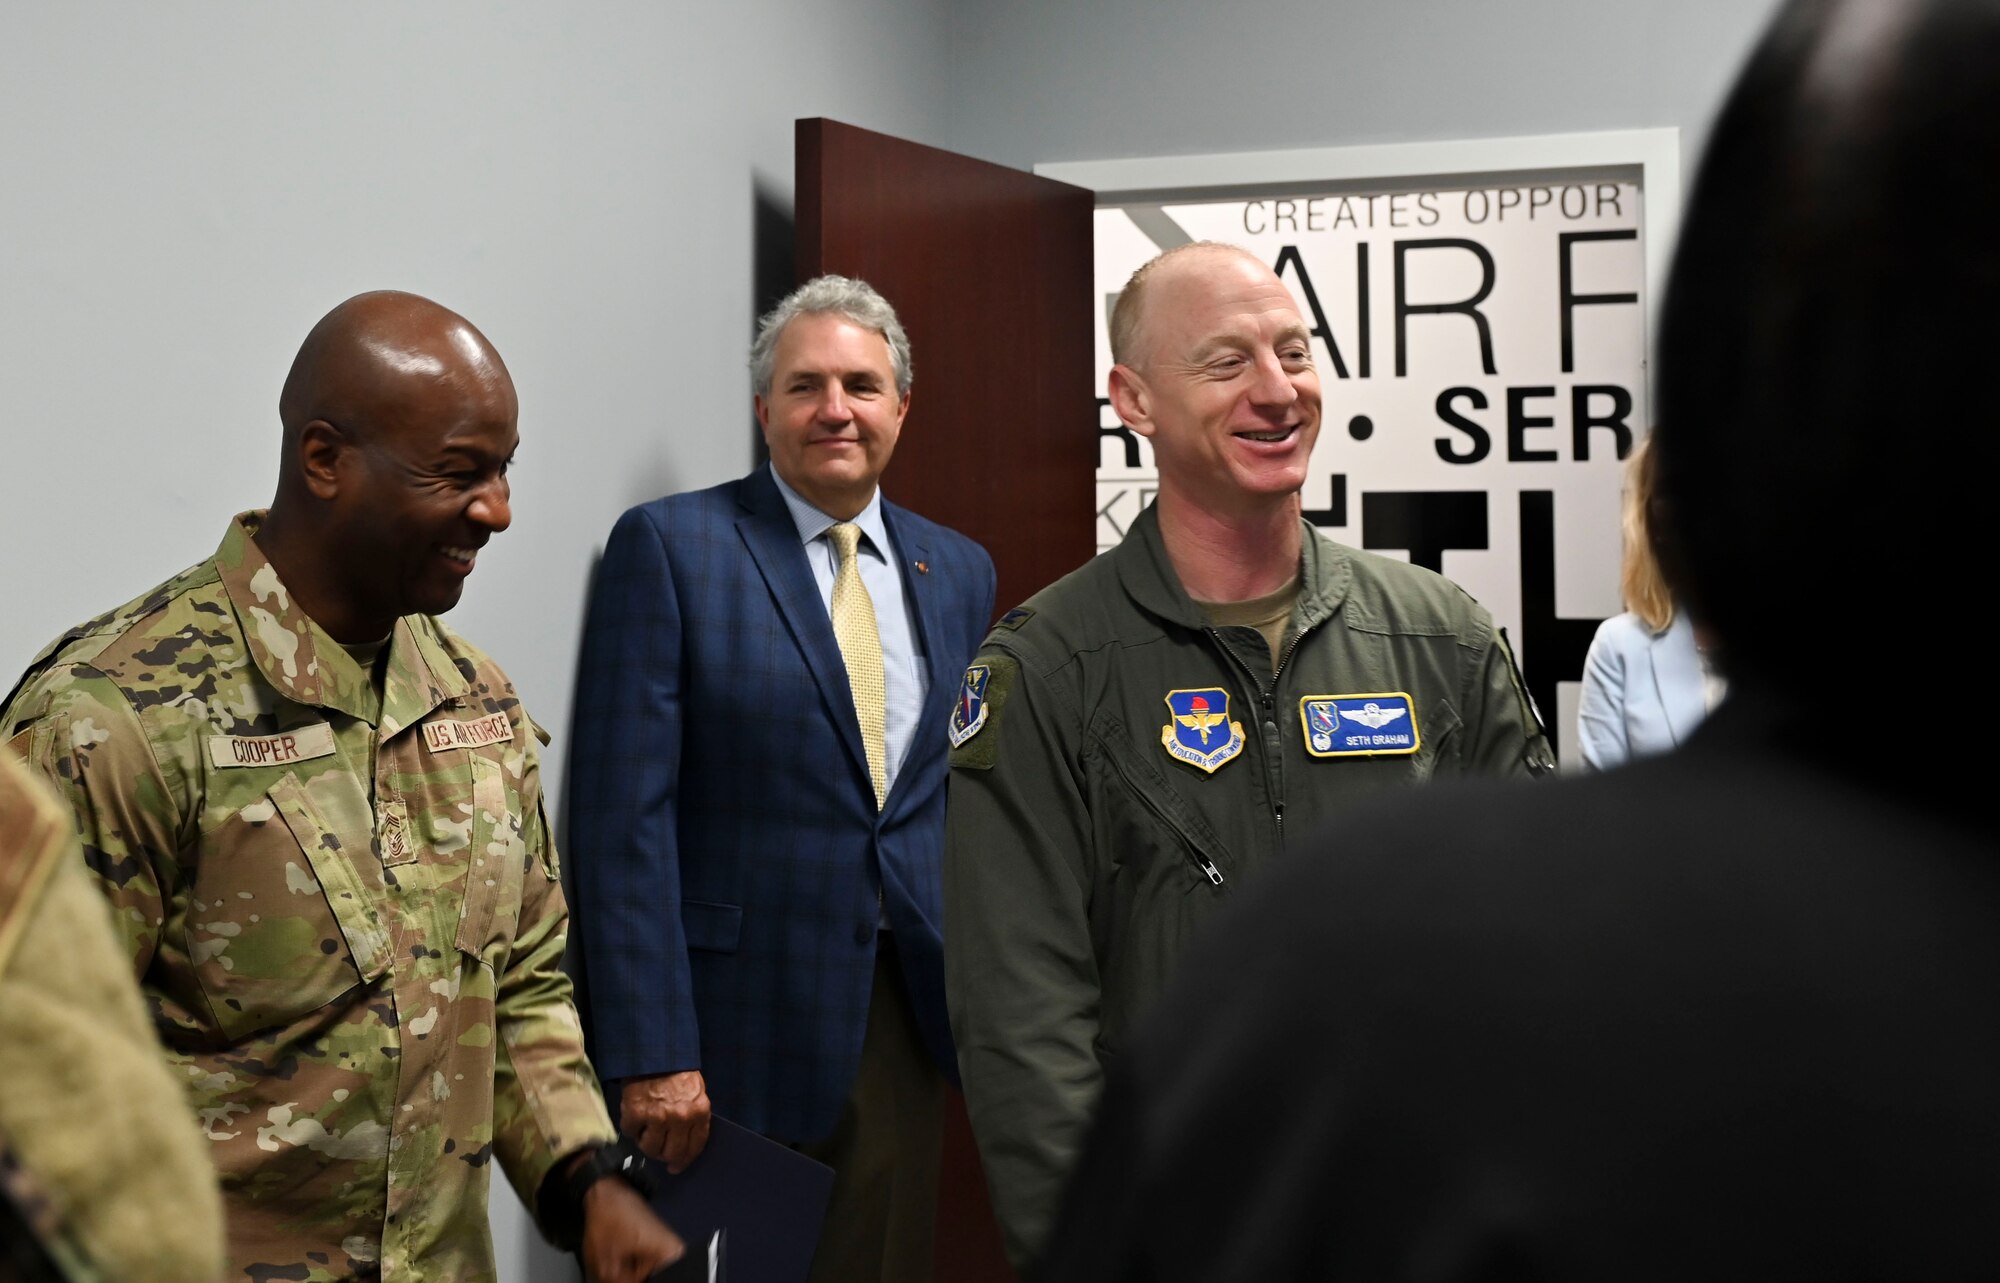 U.S. Air Force Col. Seth Graham (Right), 14th Flying Training Wing commander, and Chief Master Sgt. Antonio Cooper (Left), 14FTW command chief, share a laugh during a briefing tour of the  new Welcome Center, July 20, 2021, on Columbus Air Force Base, Miss. The Welcome Center was inspired by the Air Force True North Program, which seeks to help improve the well-being of Airmen and their families. (U.S. Air Force photo by Airman 1st Class Jessica Haynie)